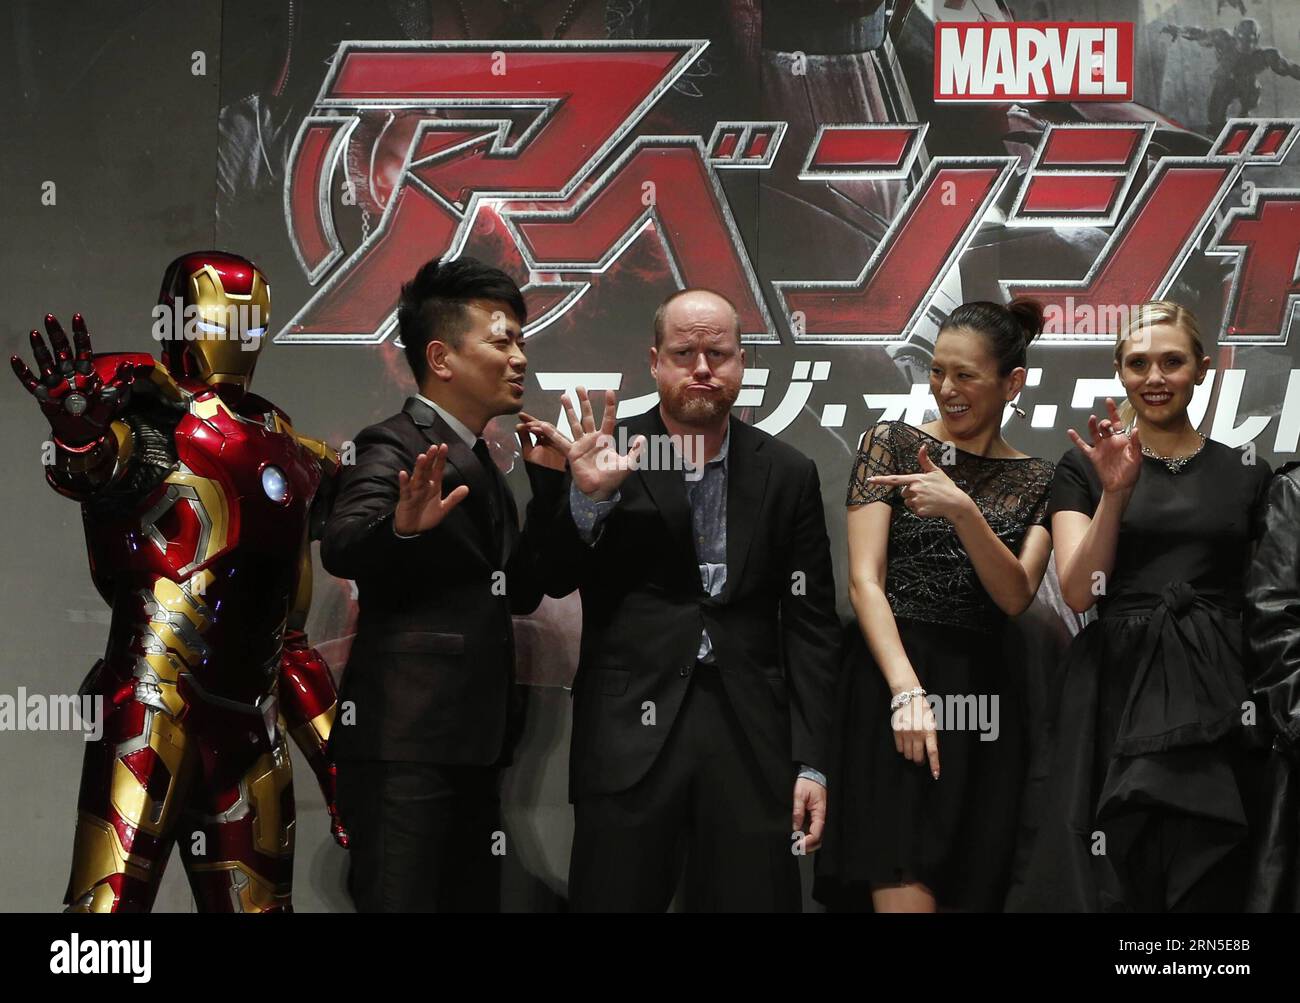 (150623) -- TOKYO, June 23, 2015 -- (L to R) Iron Man, Japanese comedian Hiroyuki Miyasako, film director Joss Whedon, Japanese actress Ryoko Yonekura, American actress Elizabeth Olsen pose for photographers during a premiere event for the new film Avengers: Age of Ultron in Tokyo, Japan, June 23, 2015. The film will be shown to the public from July 4 in Japan. )(dzl) JAPAN-TOKYO-MOVIE-AVENGERS Stringer PUBLICATIONxNOTxINxCHN   150623 Tokyo June 23 2015 l to r Iron Man Japanese Comedian Hiroyuki  Film Director Joss Whedon Japanese actress Ryoko Yonekura American actress Elizabeth Olsen Pose fo Stock Photo